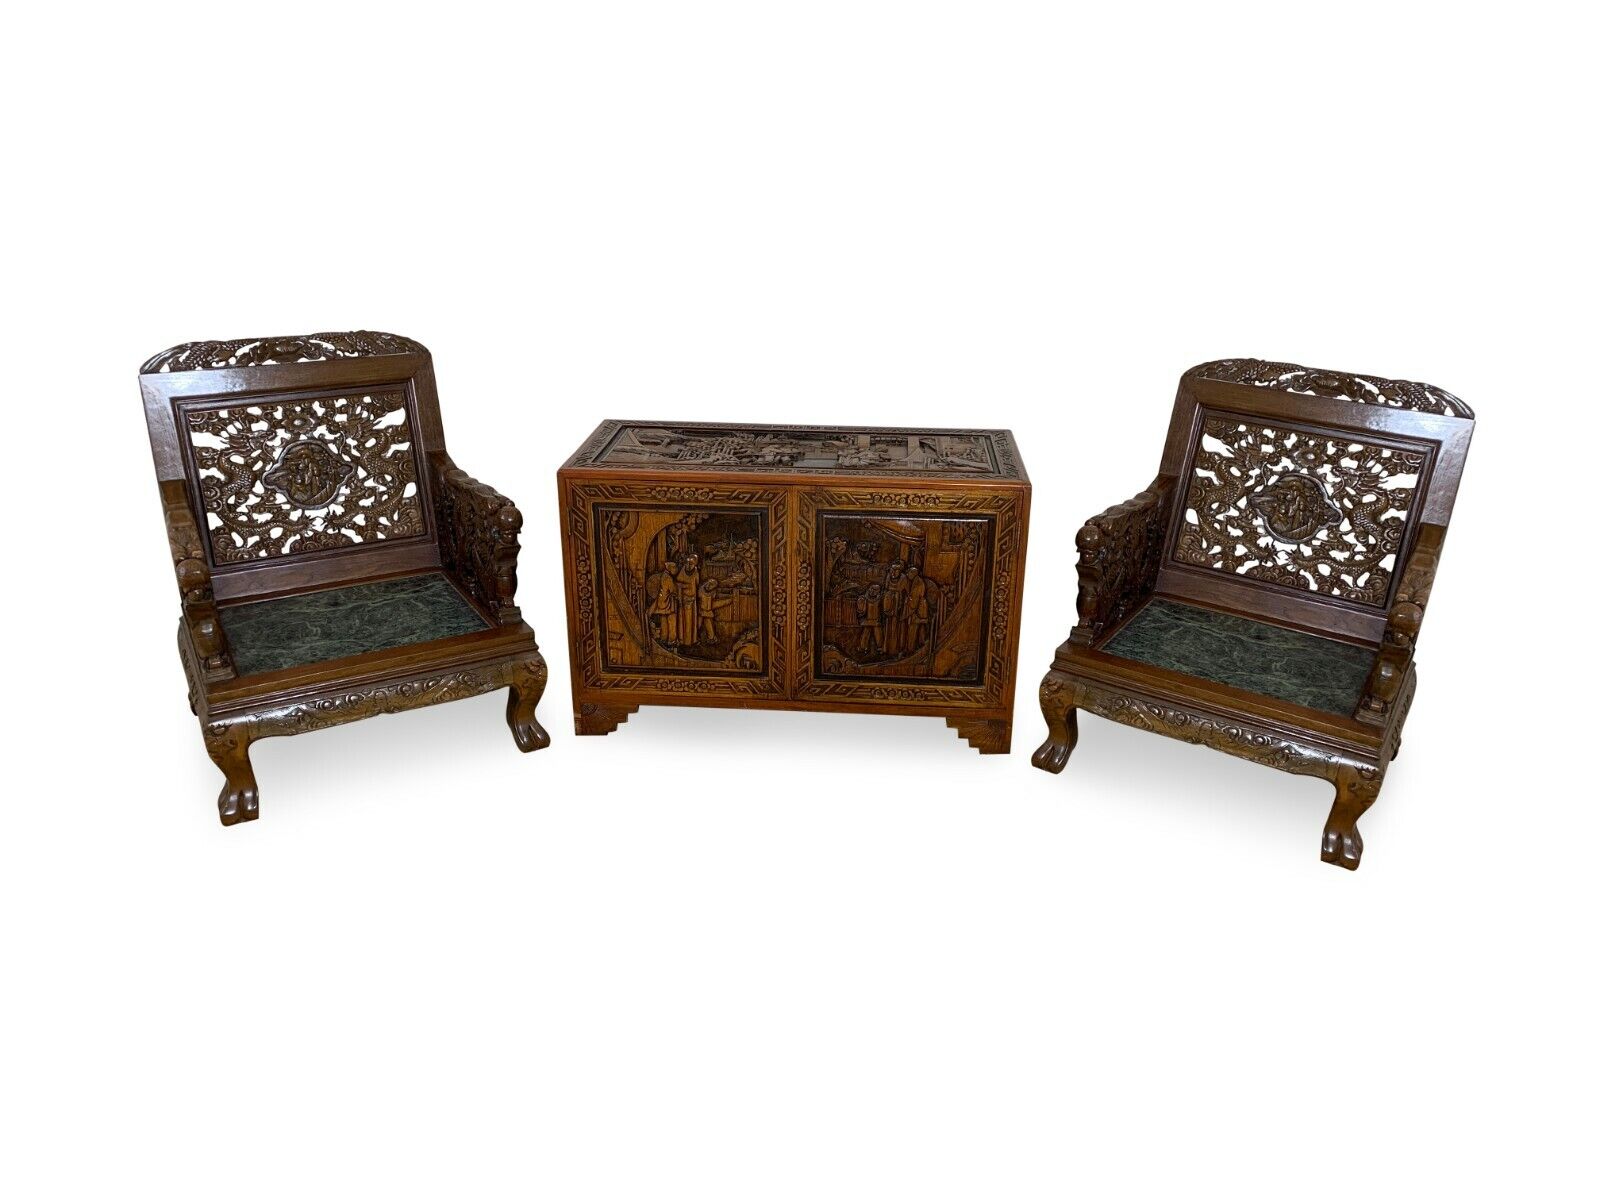 RARE Extensively Carved Chinese Chairs Marble Seats Без бренда